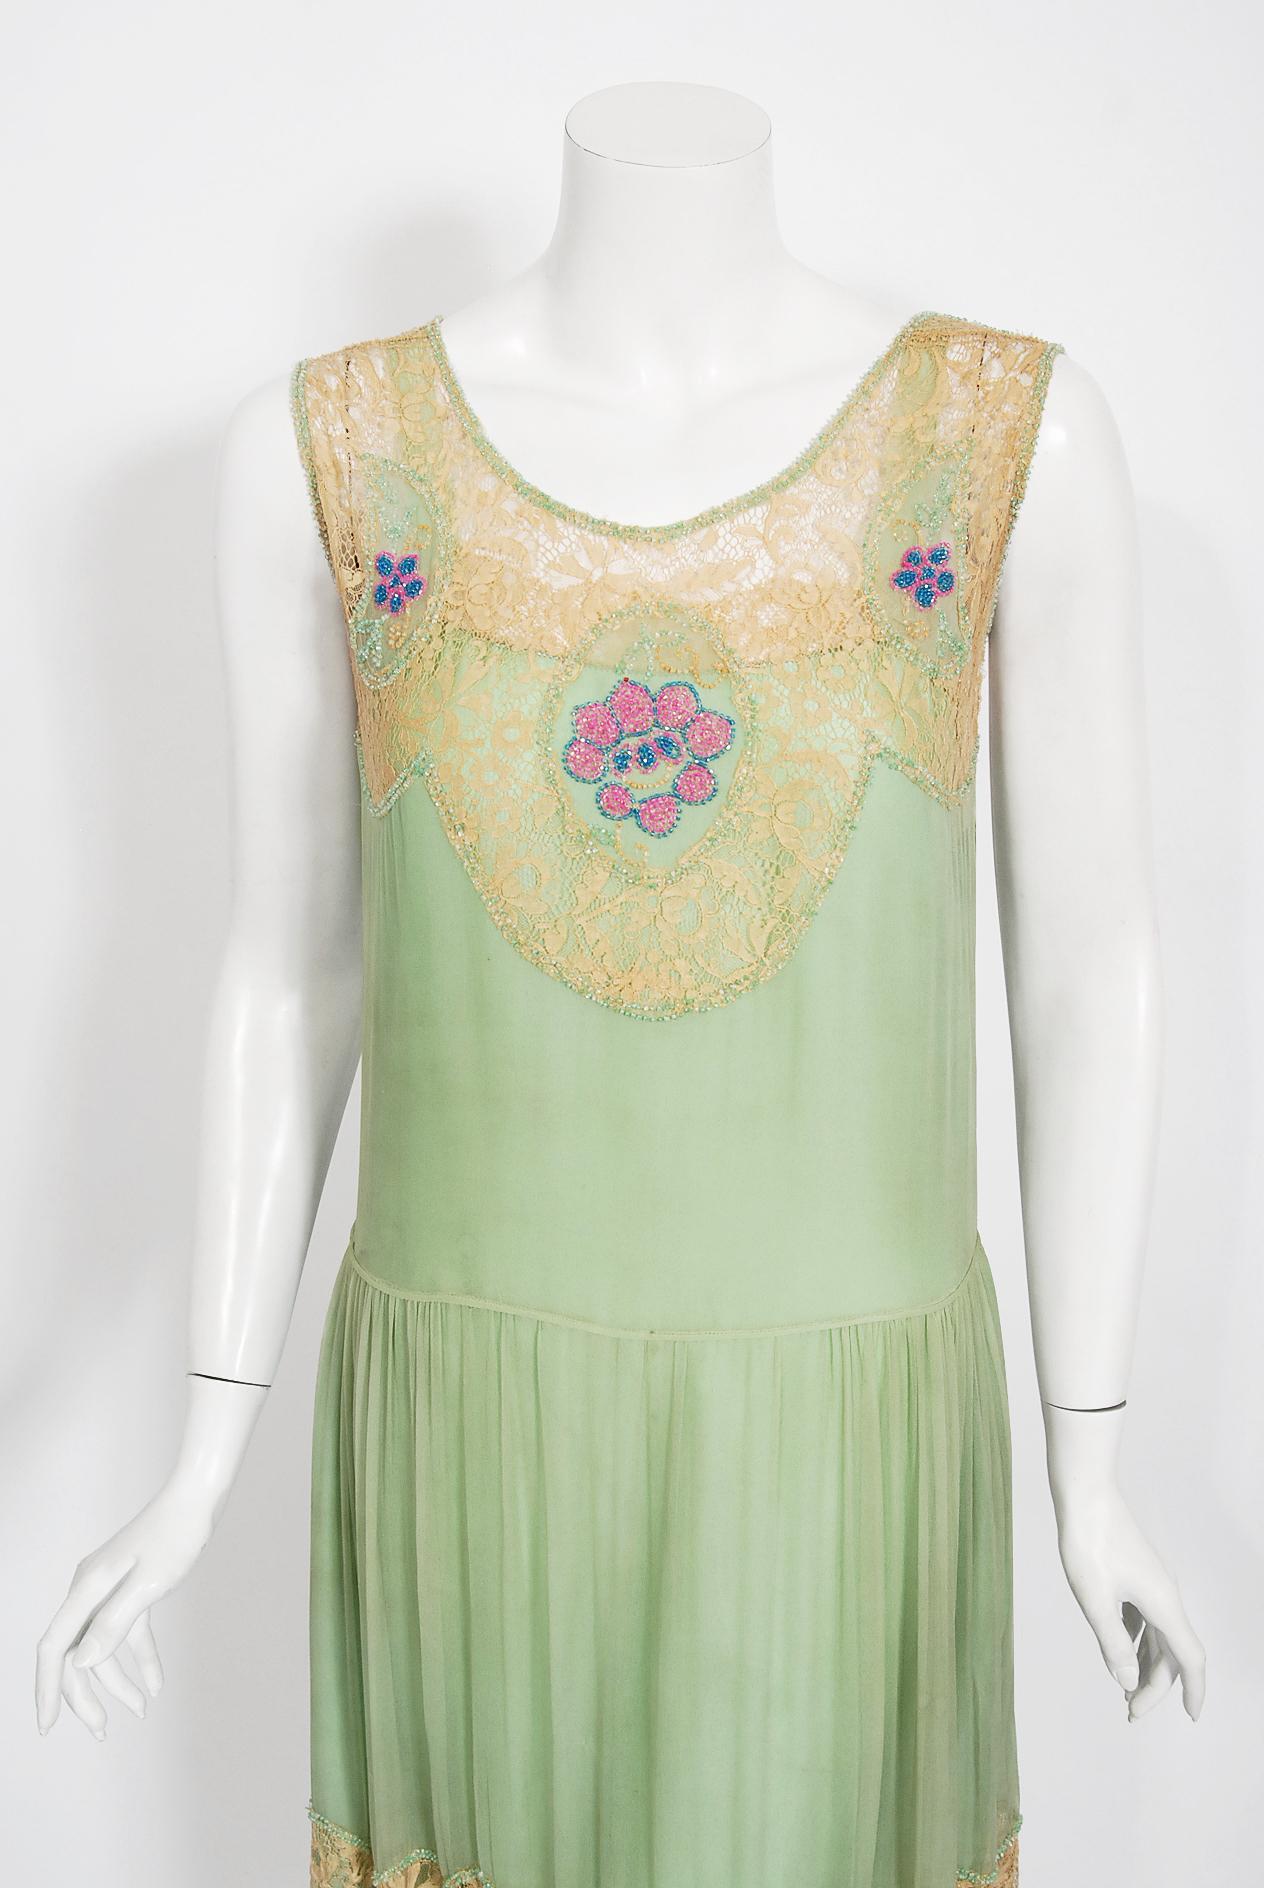 Undiminished by time, this 1920's mint-green dance dress still casts its magical spell. Like a Great Gatsby fairy! This exceptional French beauty is fashioned in three different fabrics- mint green chiffon, ecru lace and a built-in silk camisole. It